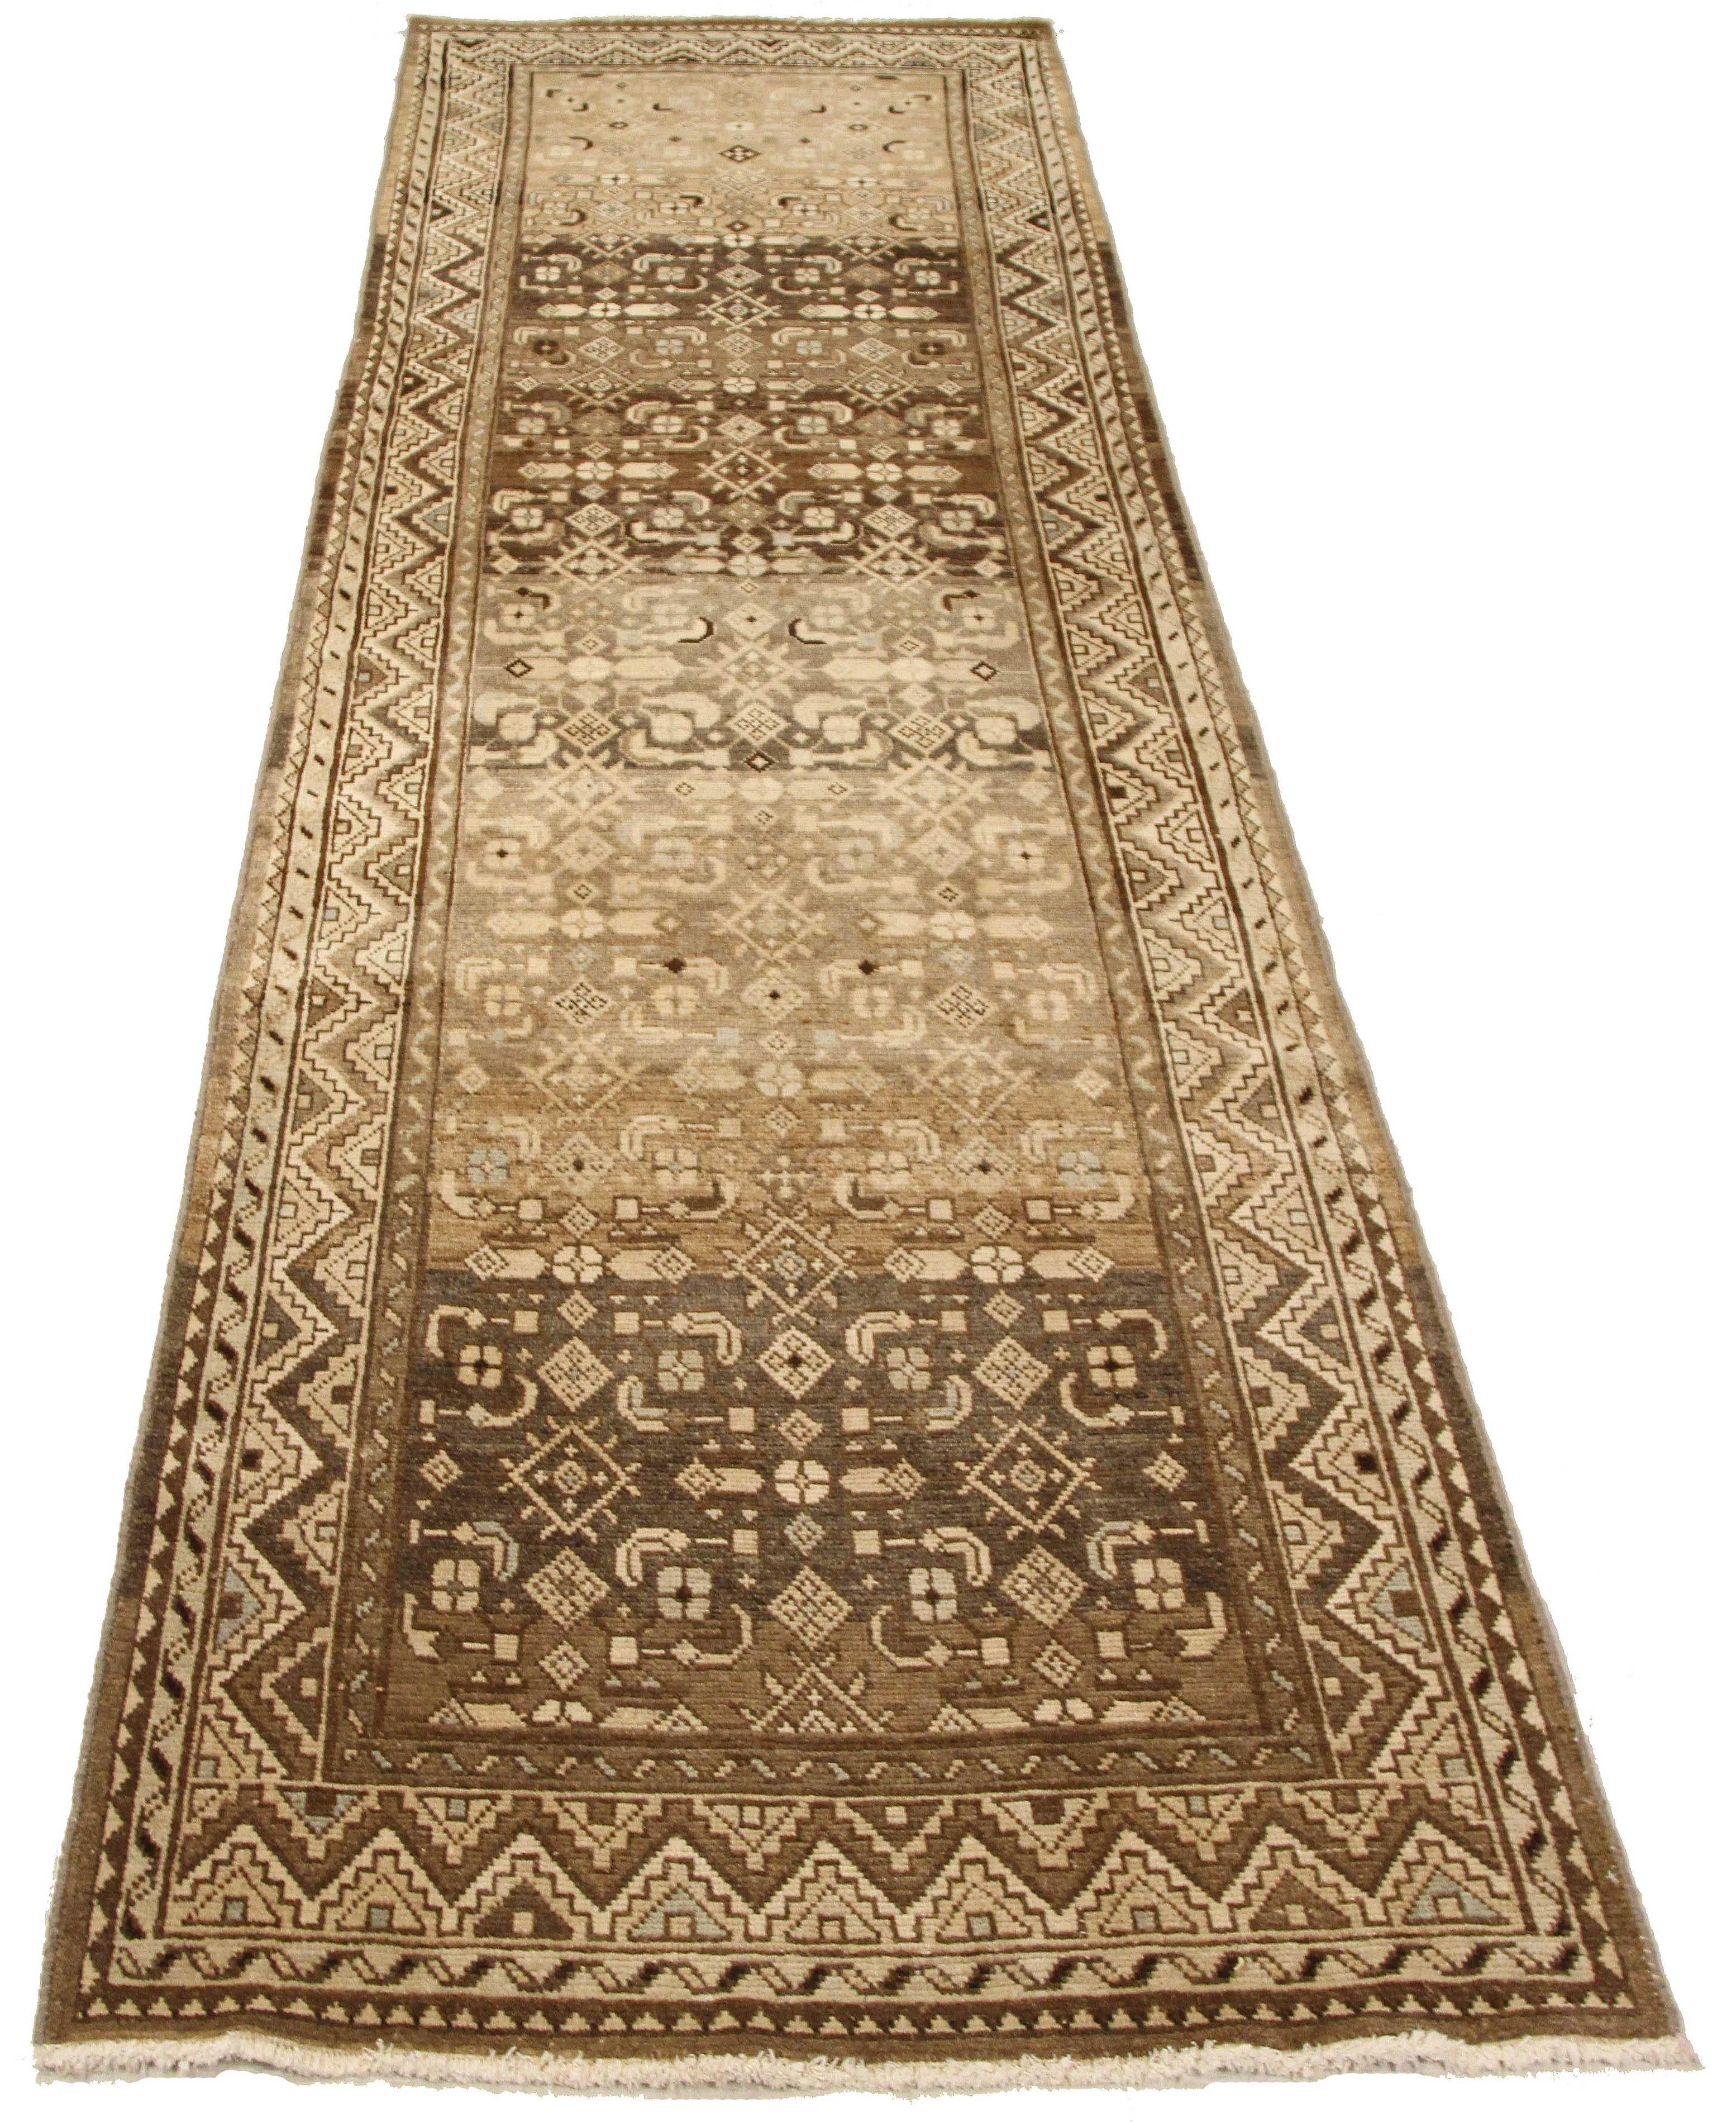 Antique Persian runner rug handwoven from the finest sheep’s wool and colored with all-natural vegetable dyes that are safe for humans and pets. It’s a traditional Malayer design featuring gray and brown geometric patterns over an ivory field. It’s